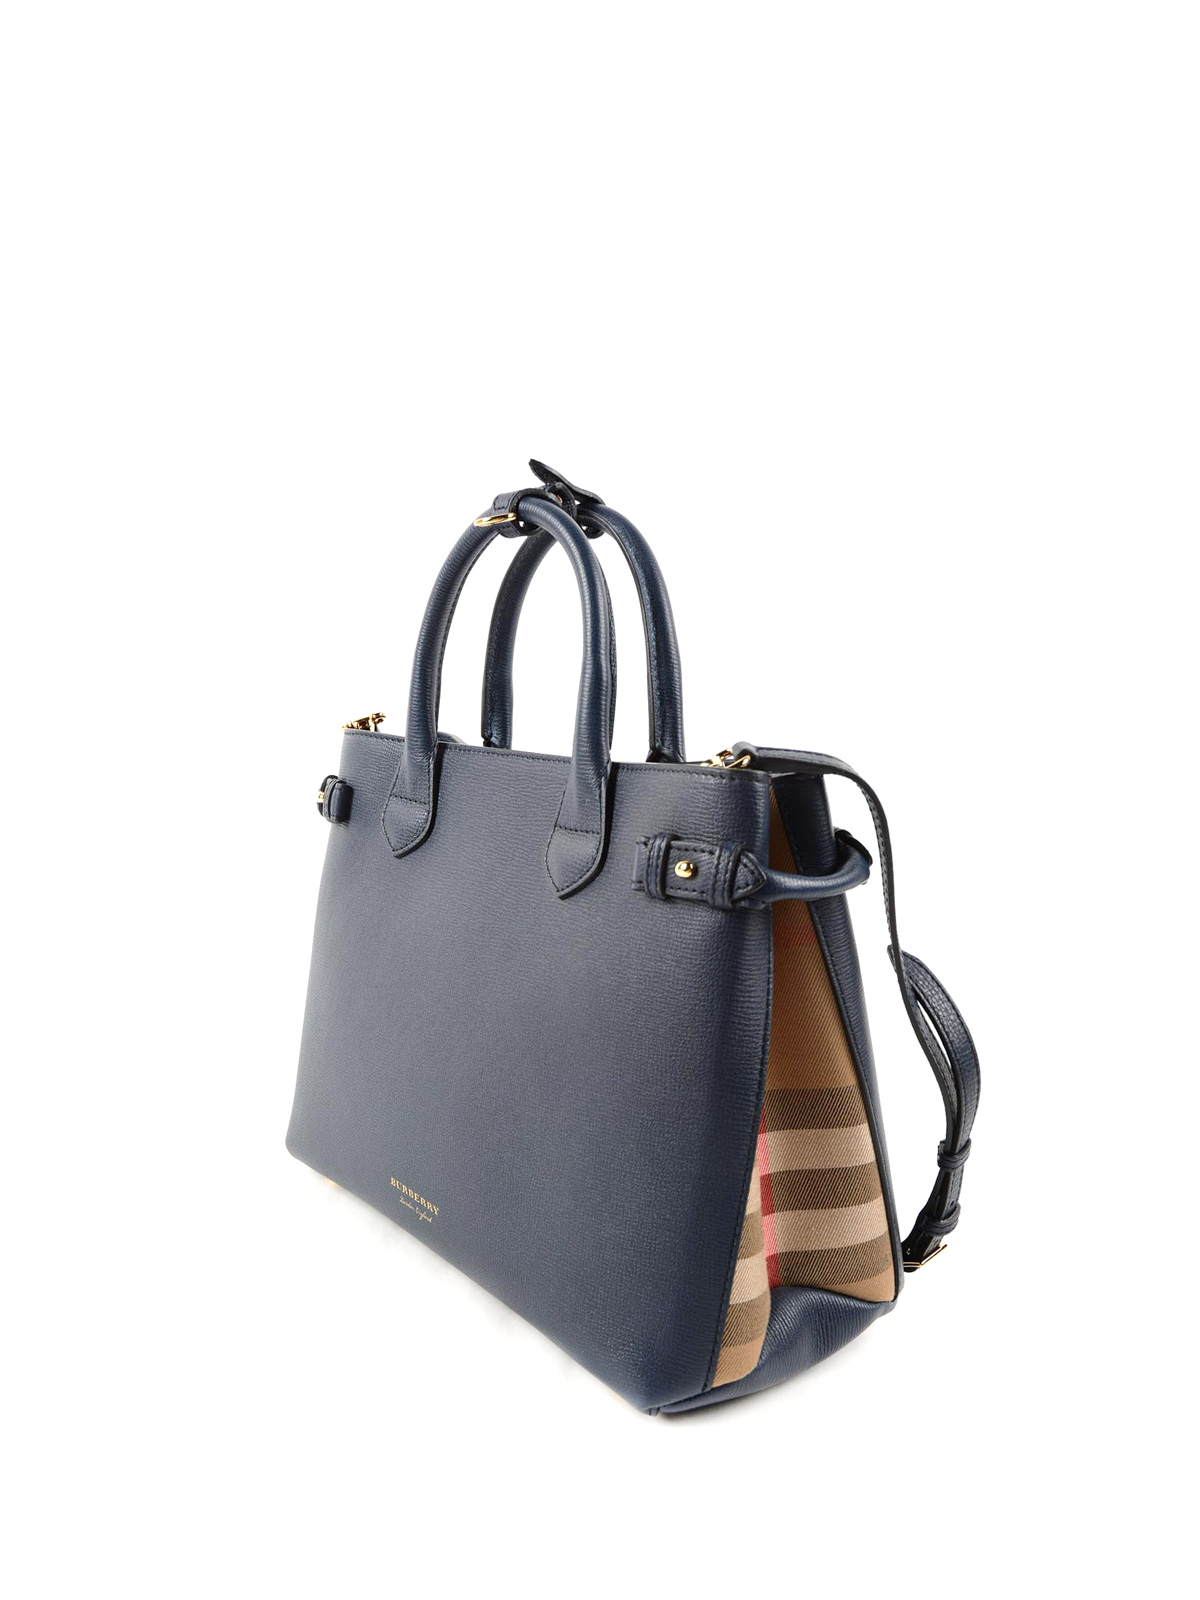 burberry medium banner leather tote